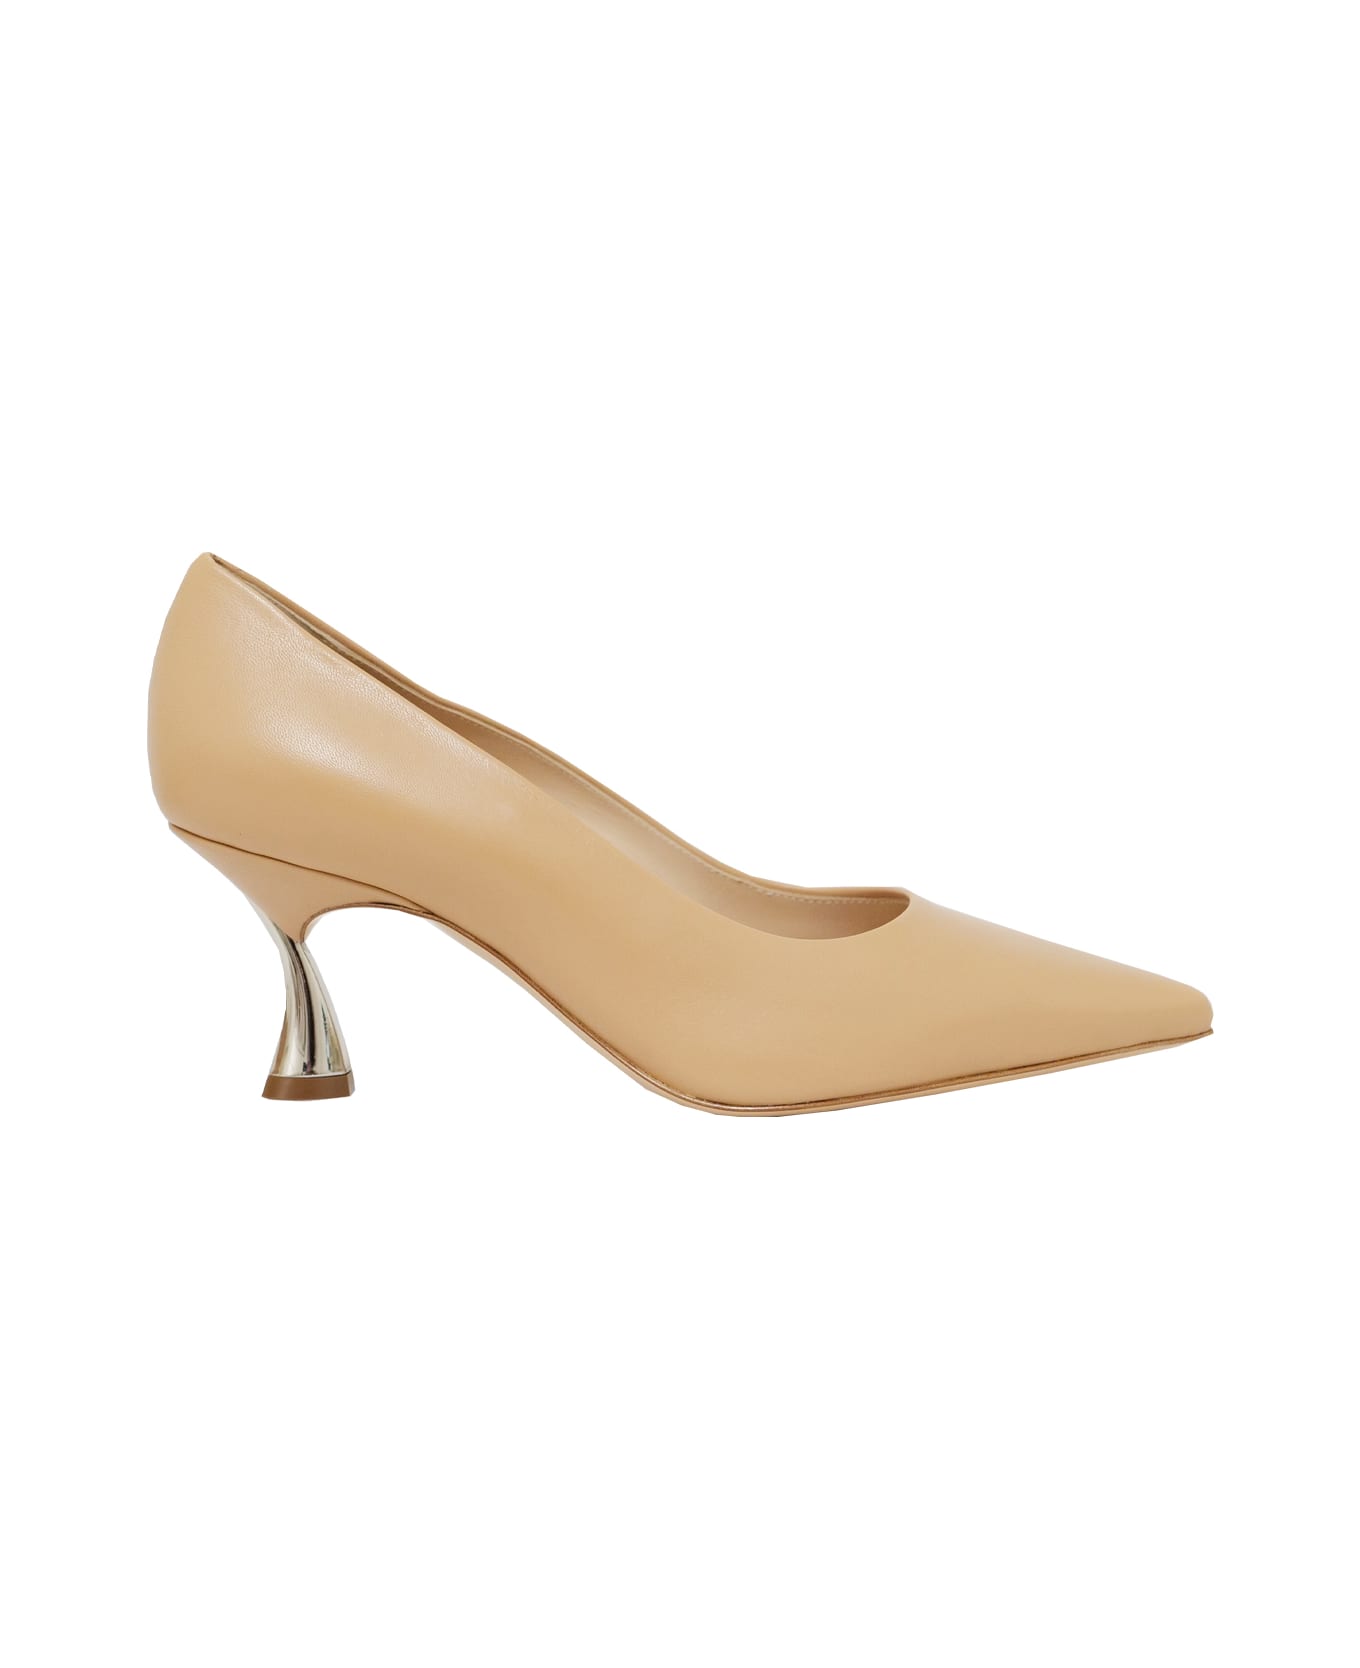 Casadei Shoes With Heel - Nude ハイヒール